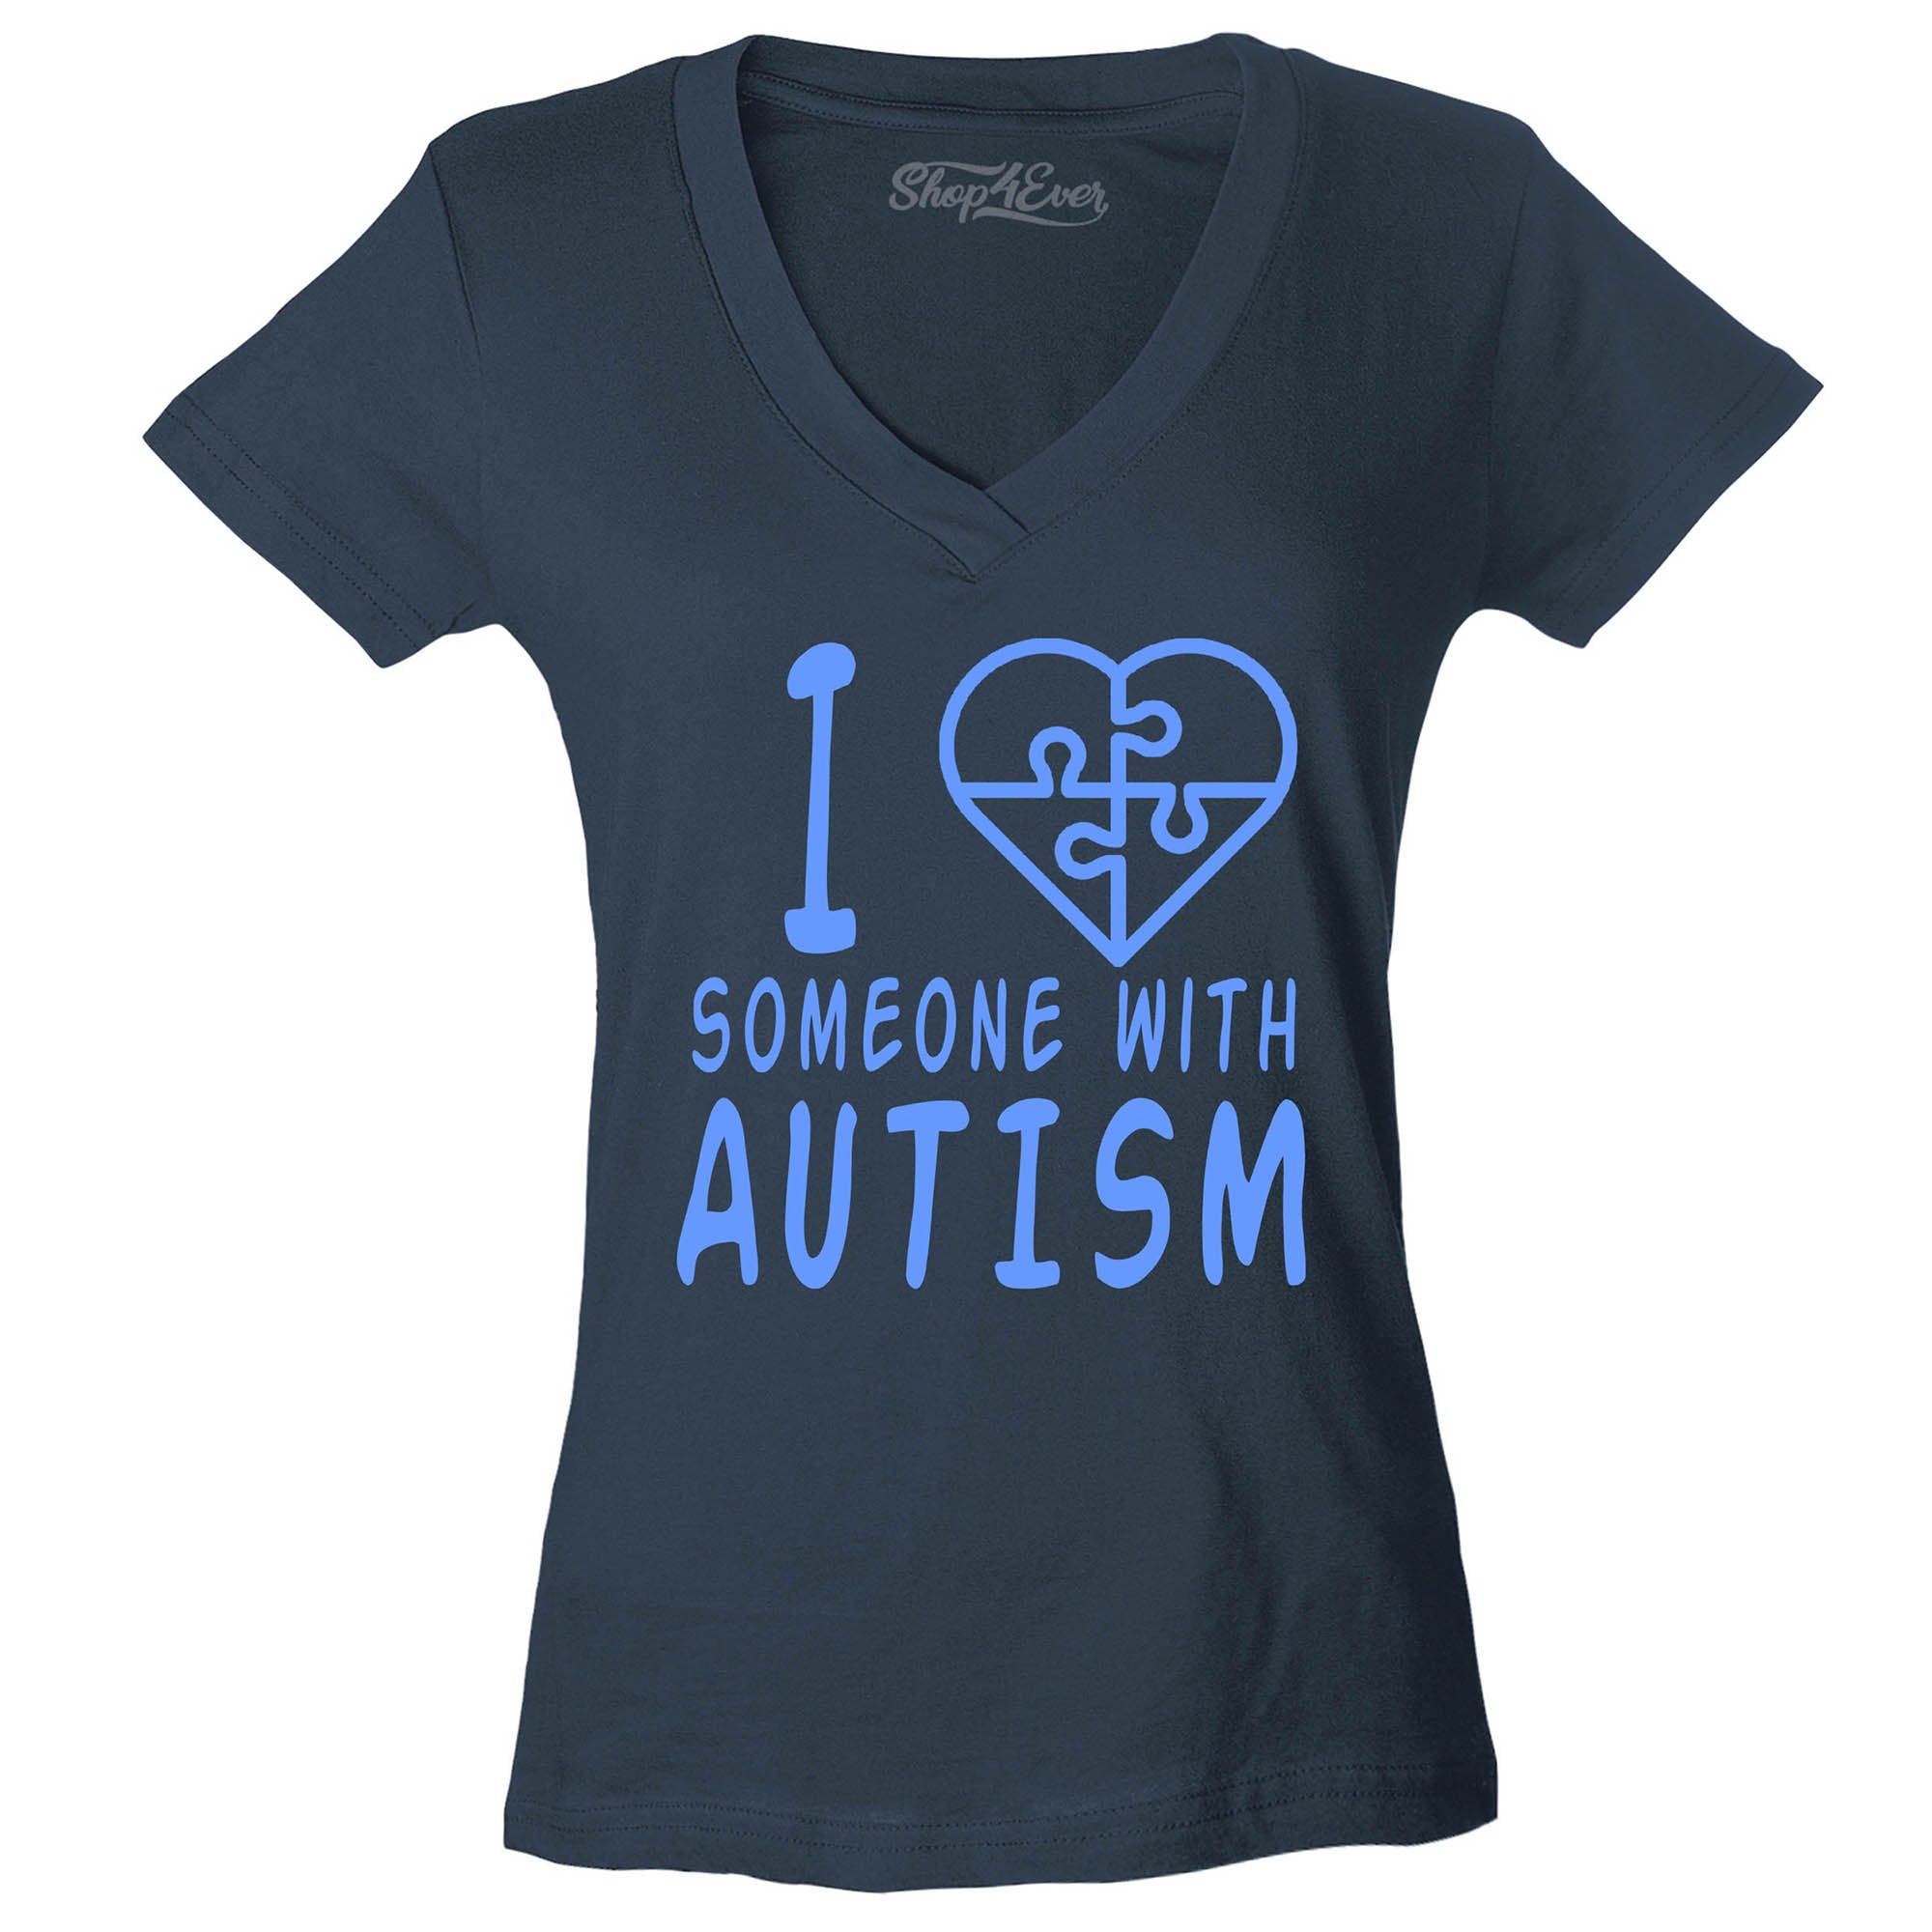 I Love Someone with Autism Blue Women's V-Neck T-Shirt Autism Support Shirts